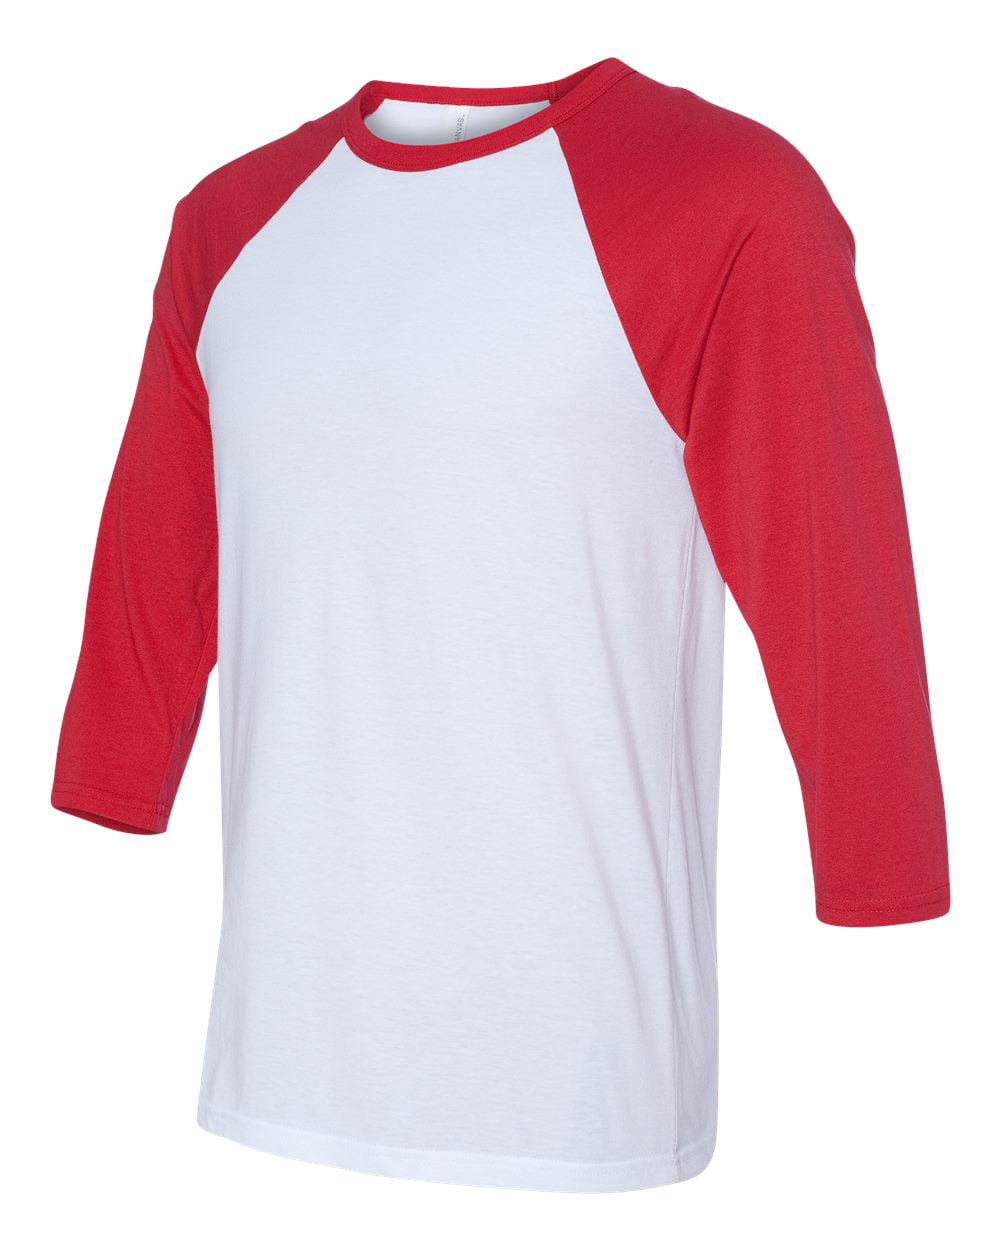 white baseball shirt with red sleeves